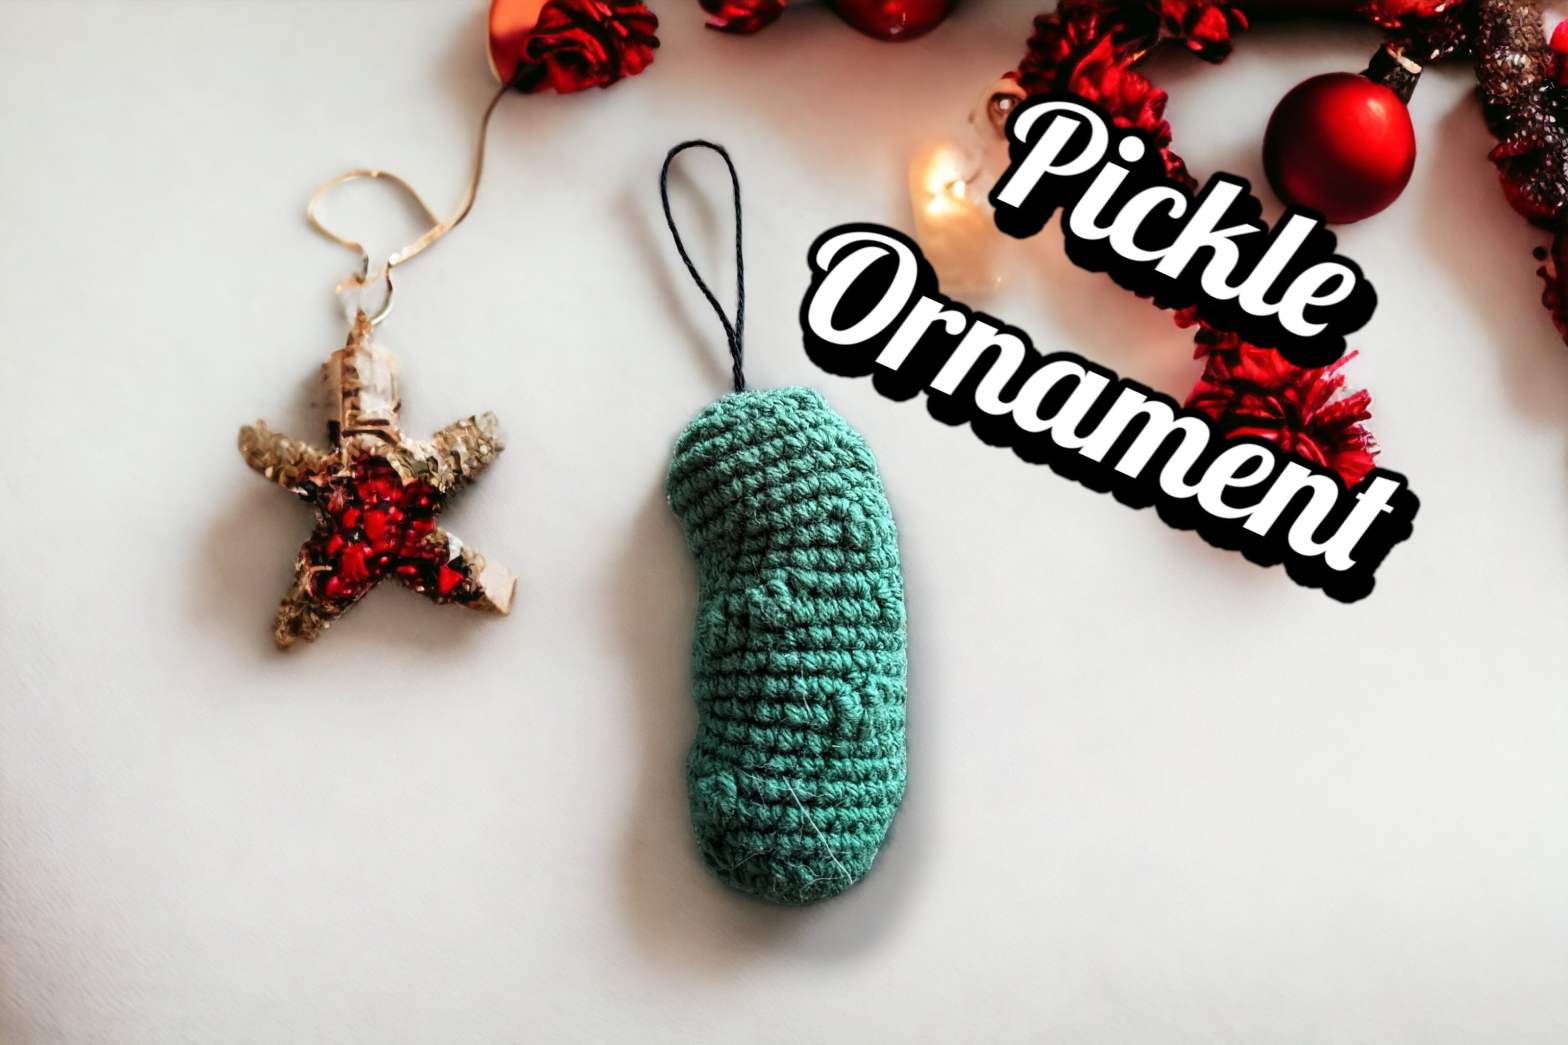 How to Make a Pickle Ornament